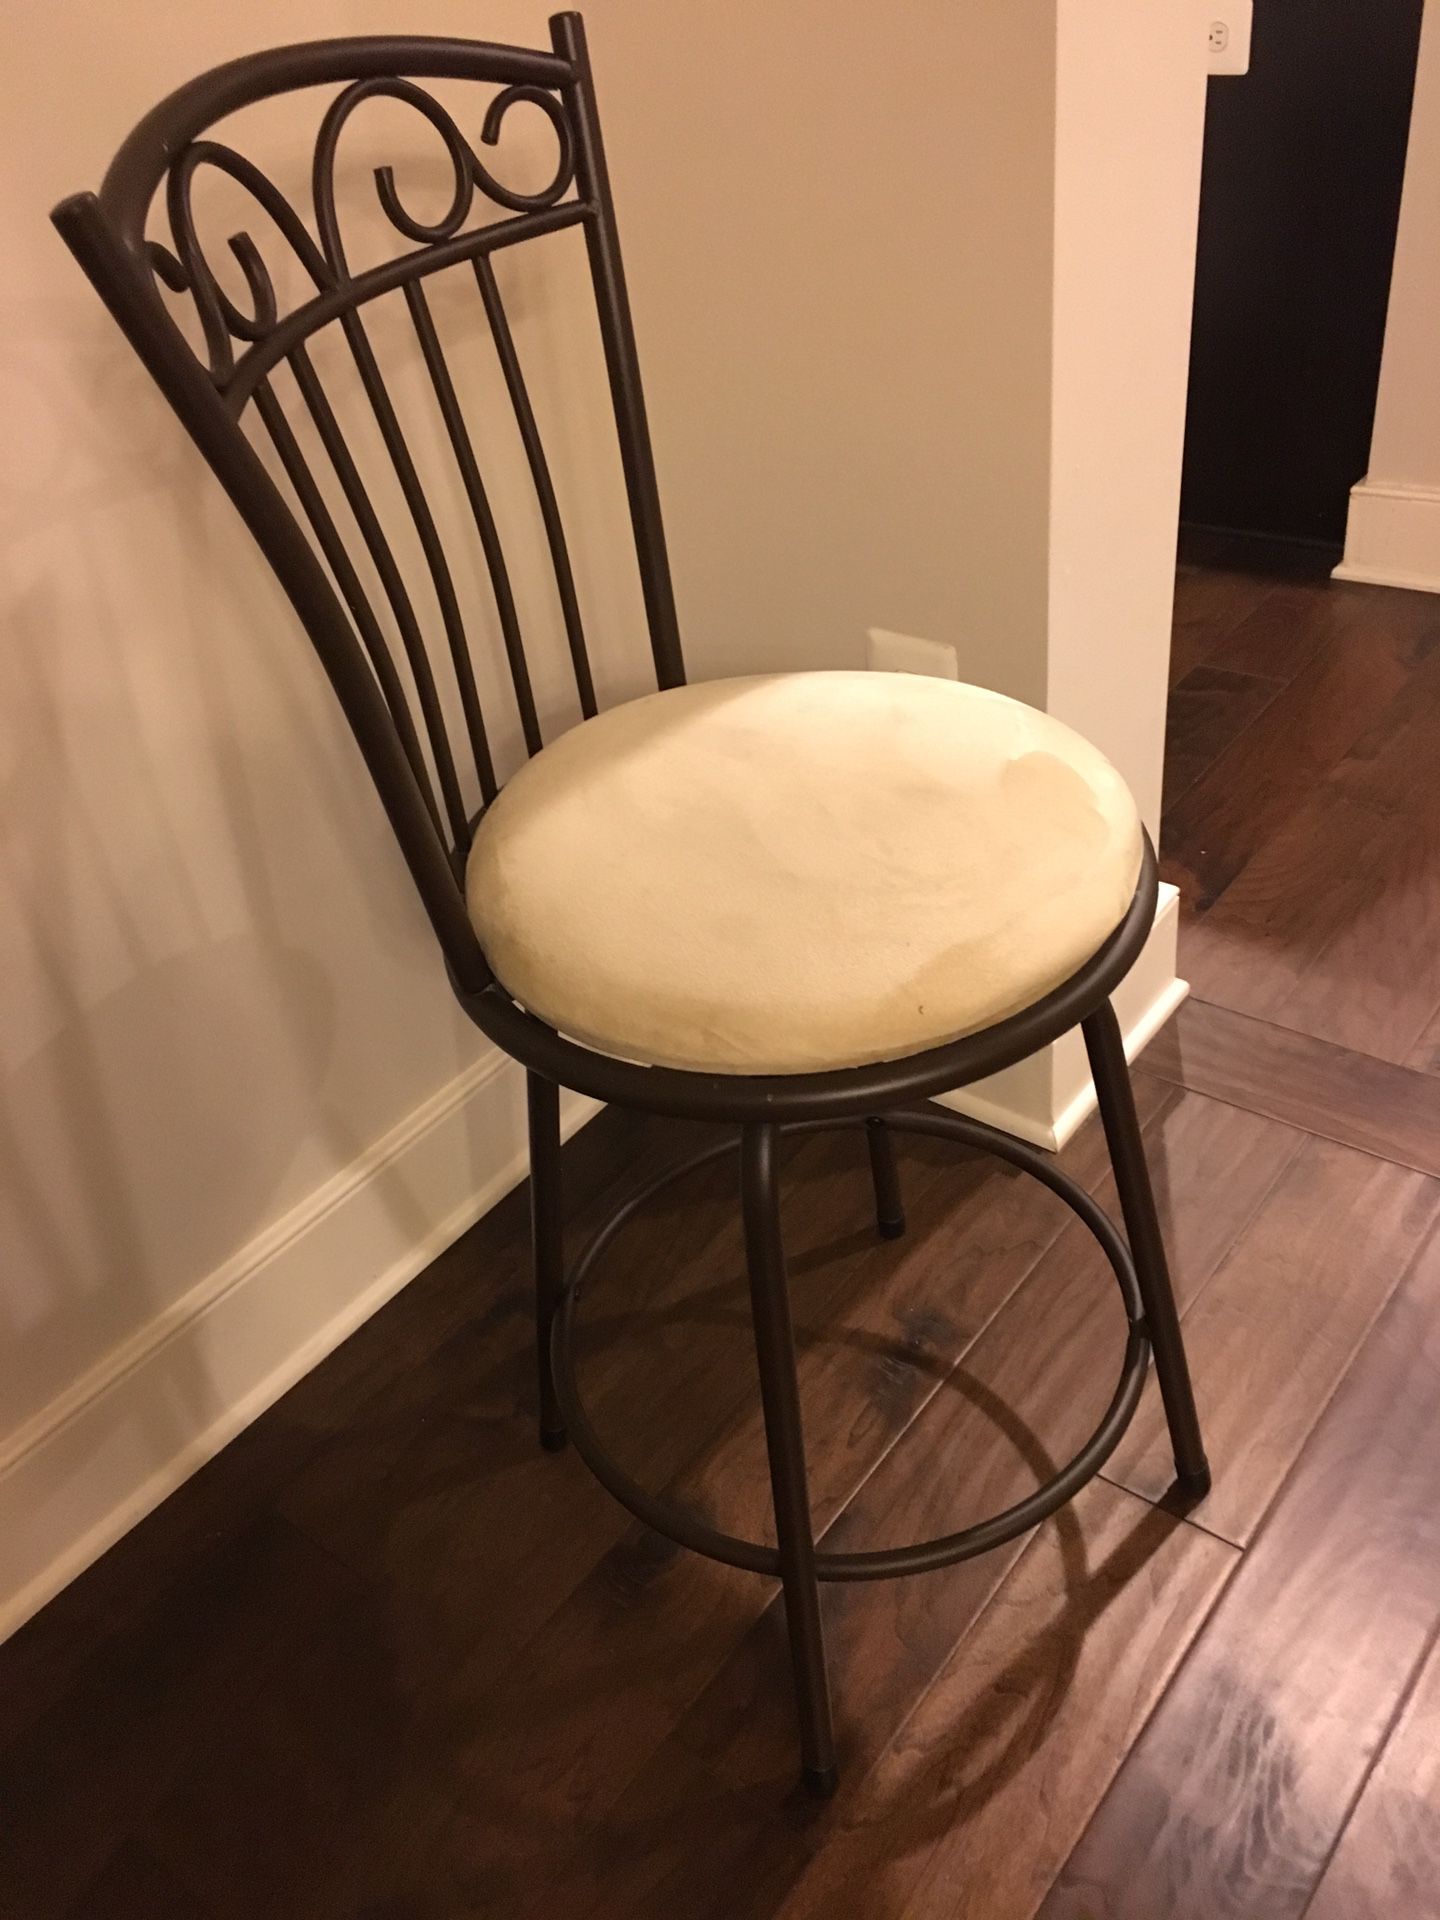 Set of three brown metal swivel bar stools. Normal wear ( good condition)Beige color. $55